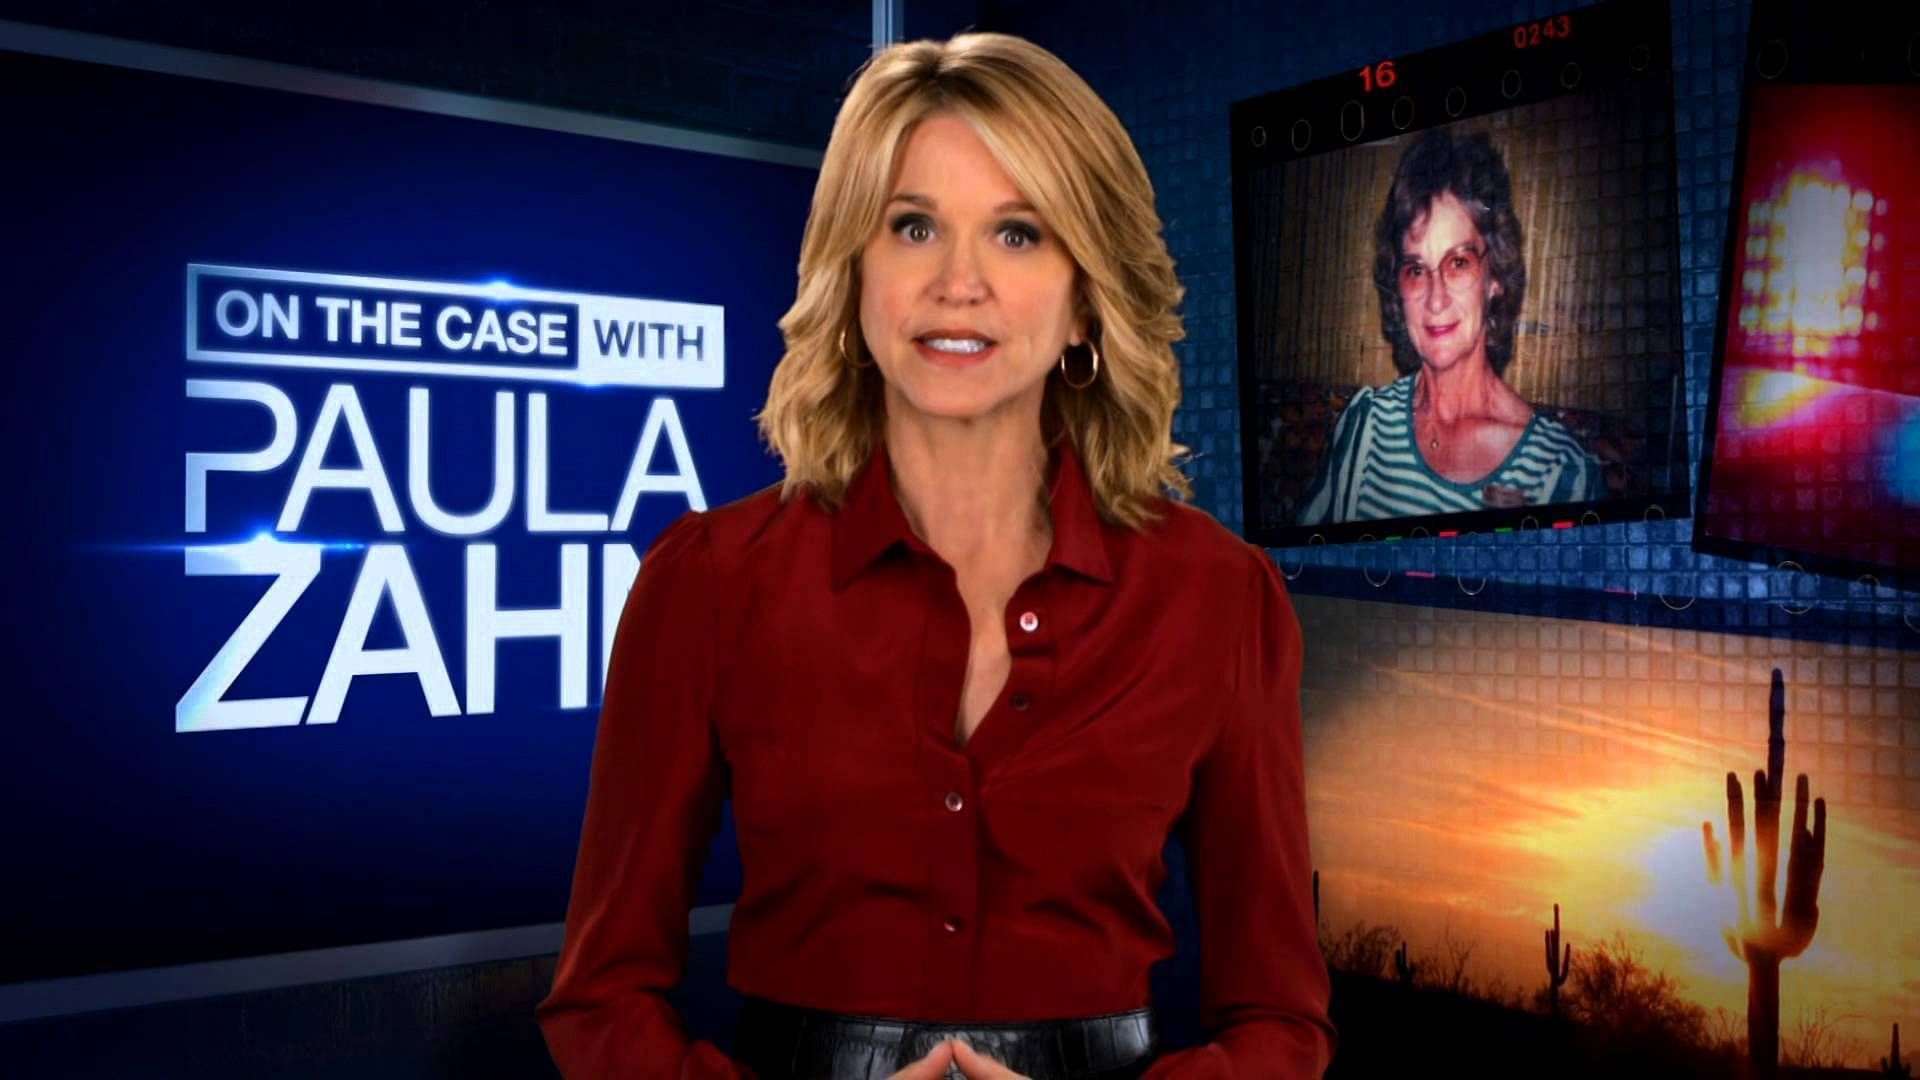 A promotional poster of On The Case With Paula Zahn (Image Via Pinterest/Google)